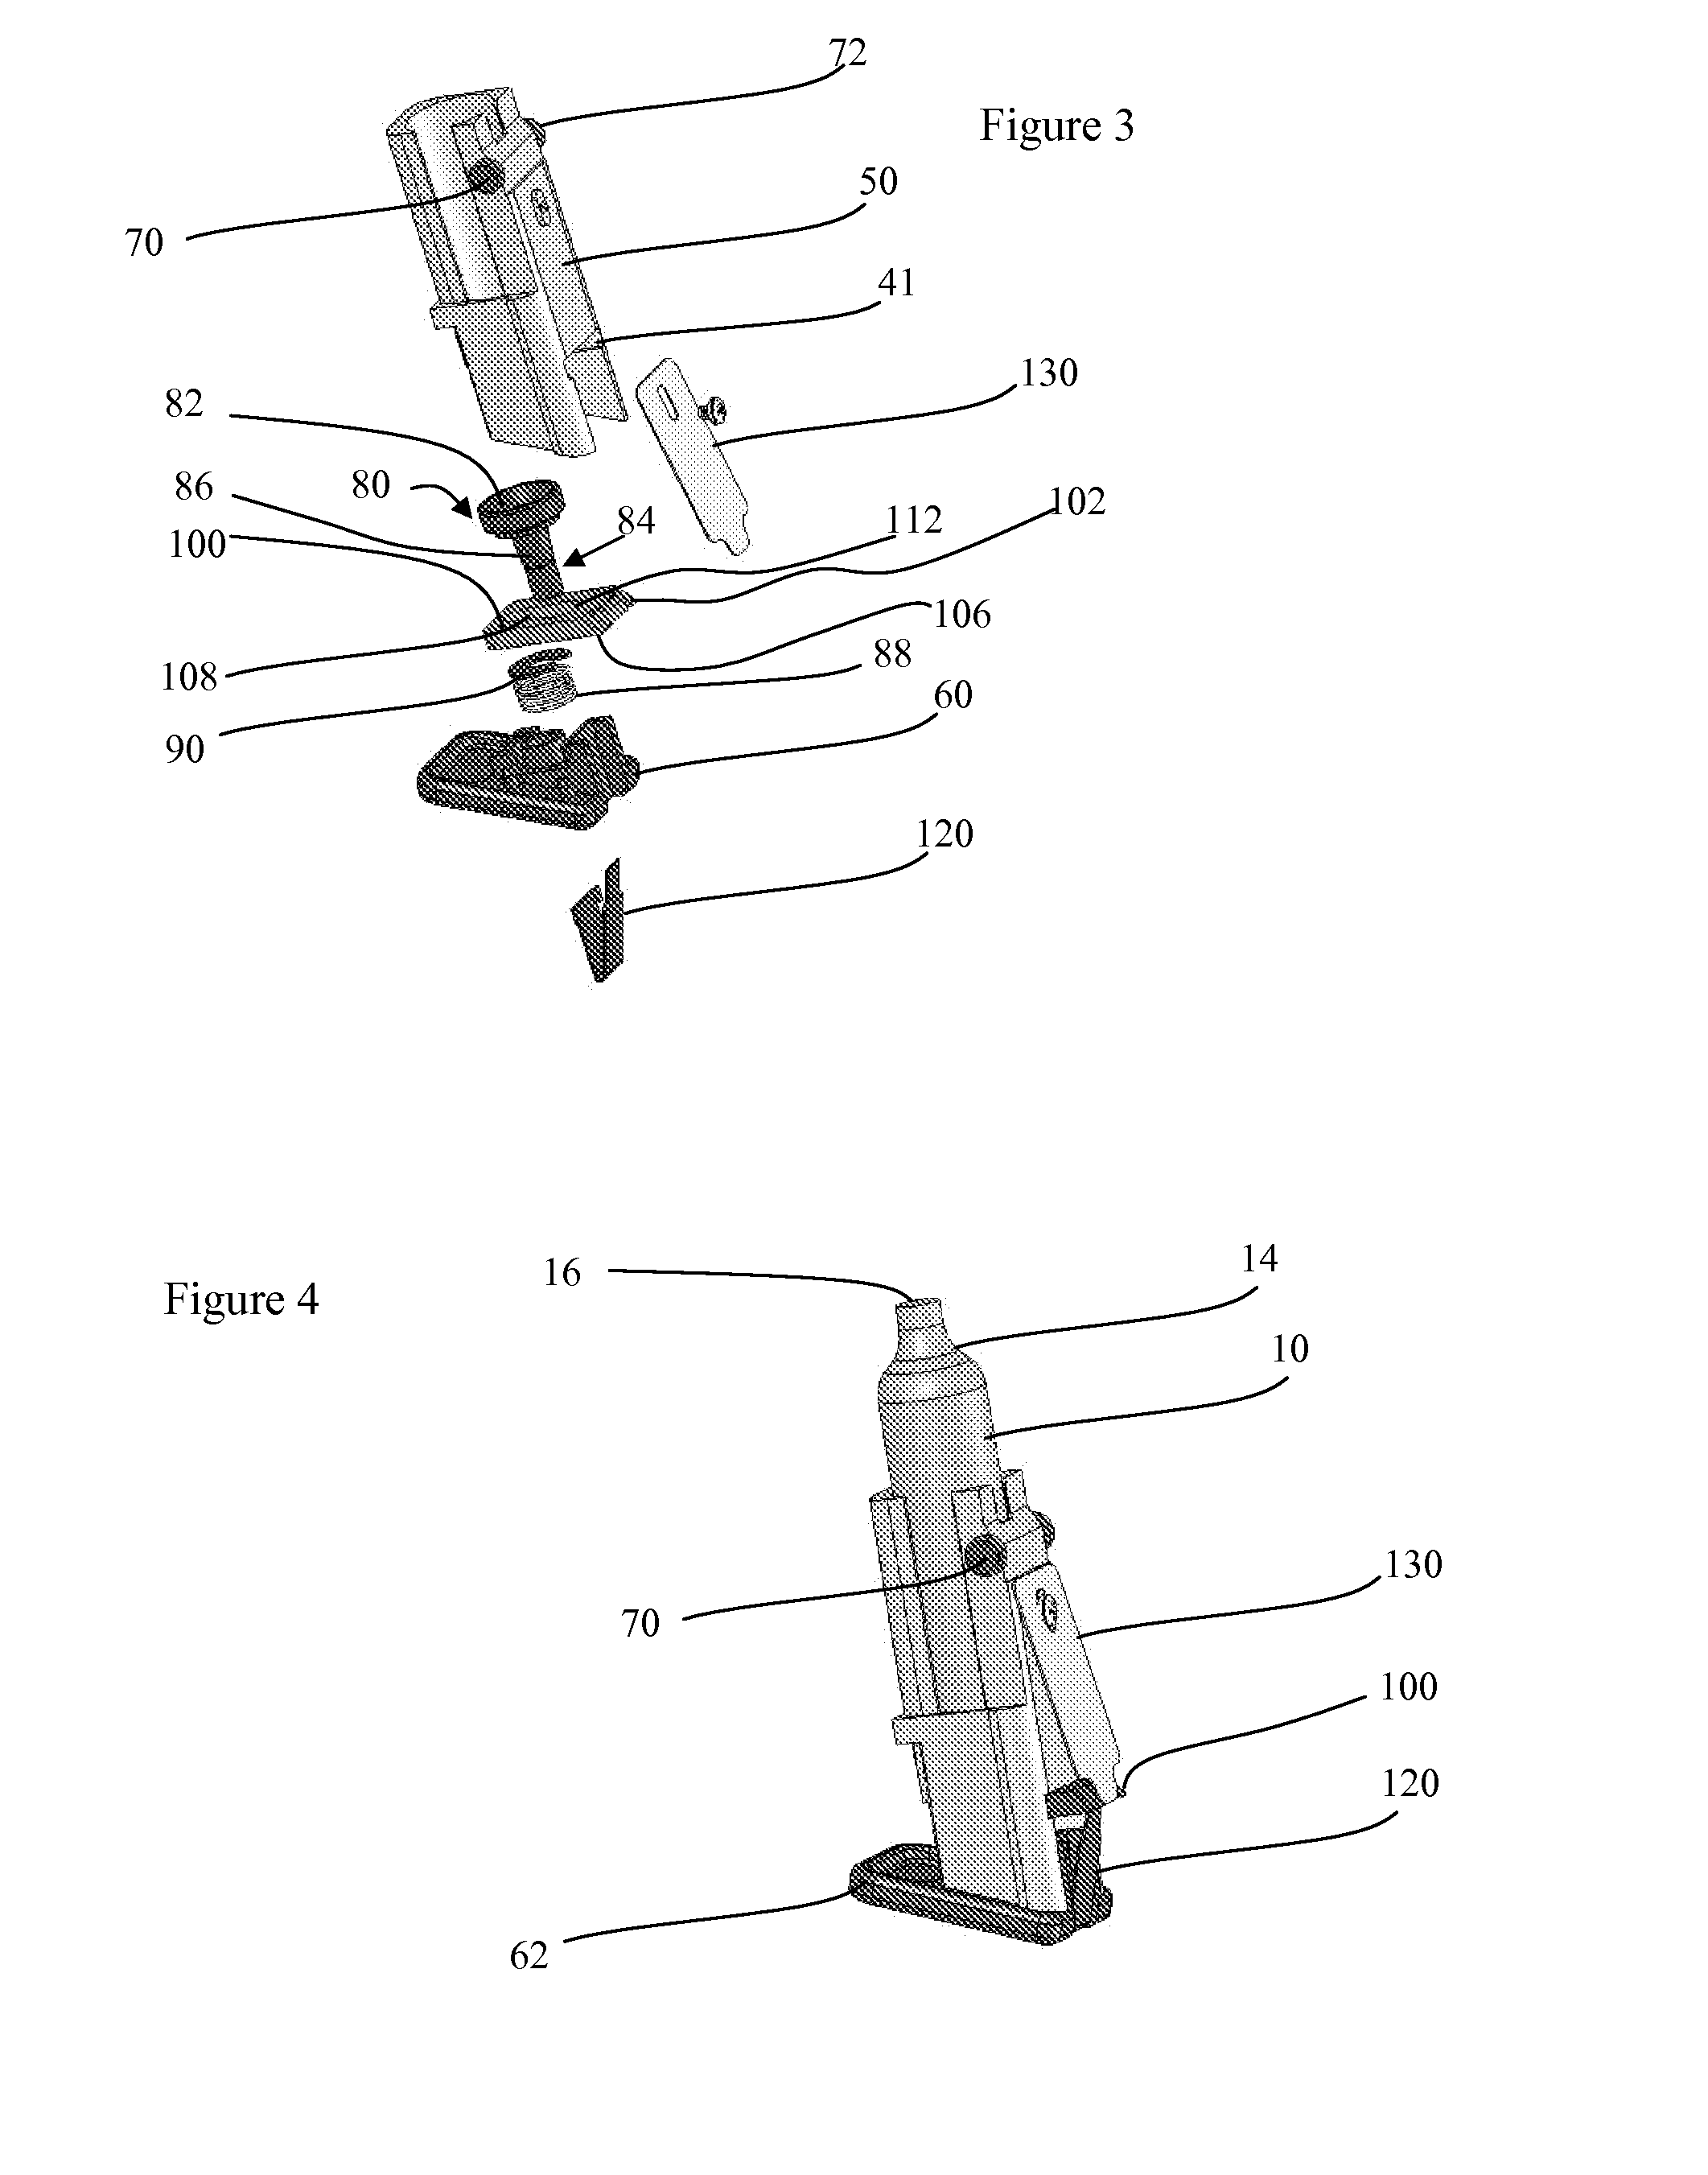 Magazine Assembly for Presenting a Pressure Cartridge to a Compressed Gas Powered Device